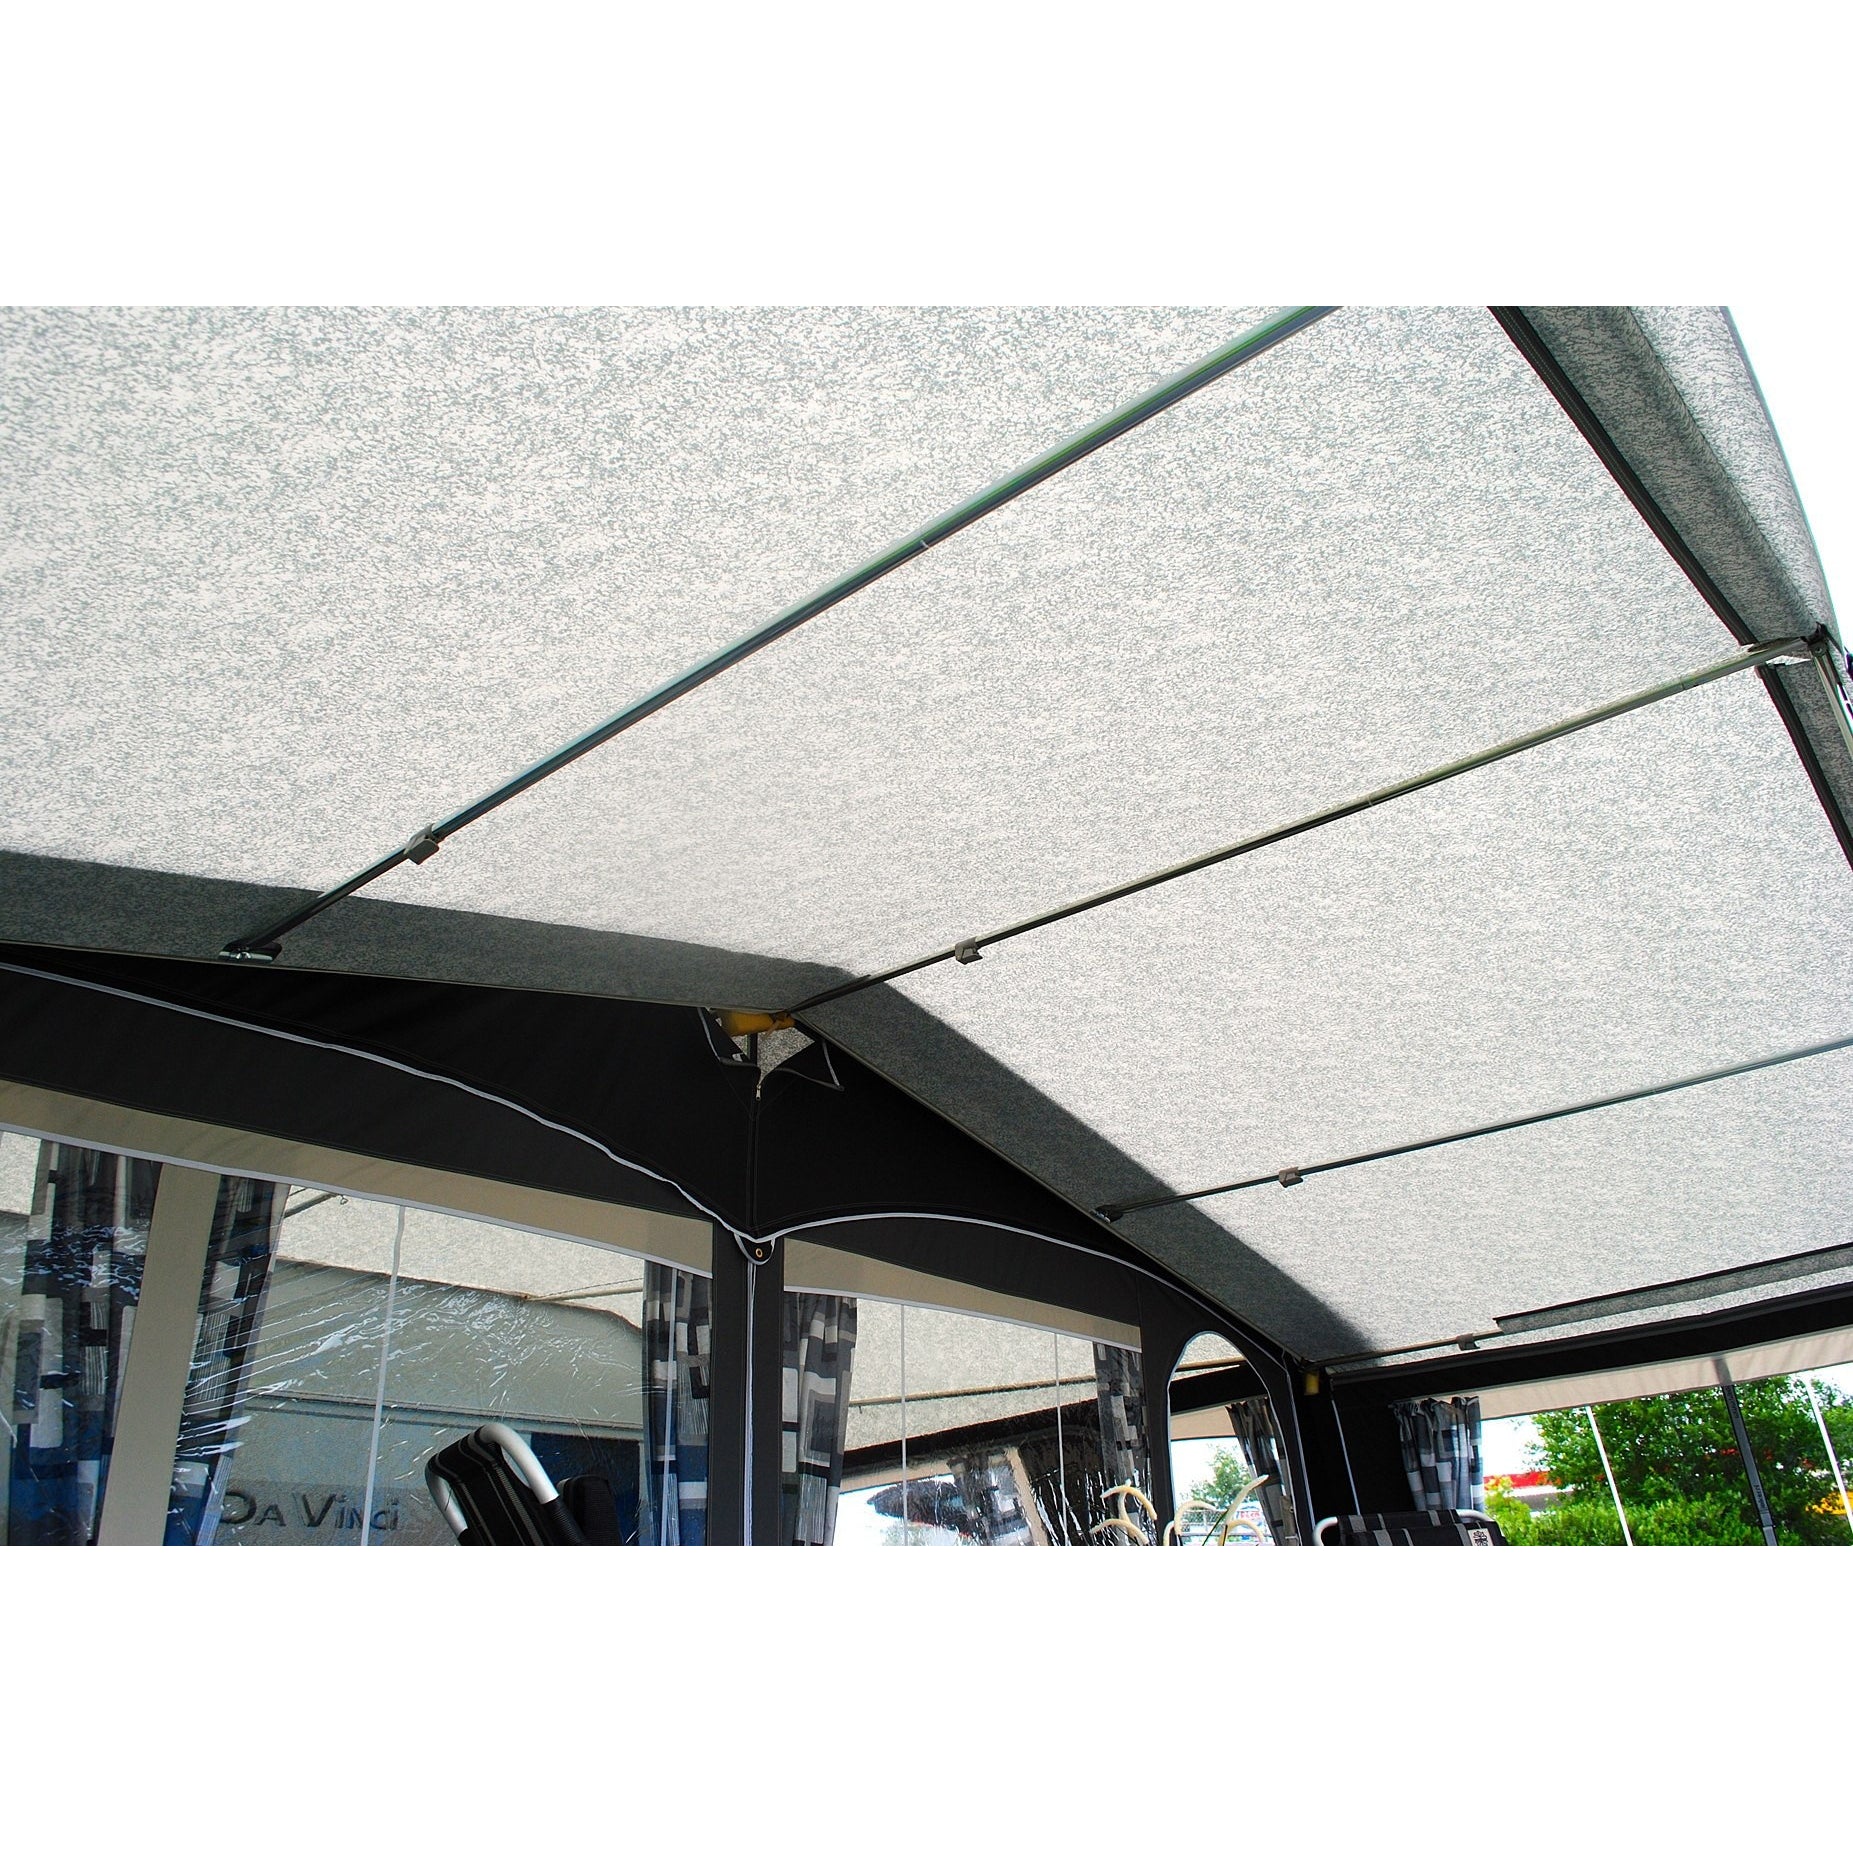 Walker Patio Canopy for Caravan Awning (2018) + Free Storm Straps - Quality Caravan Awnings